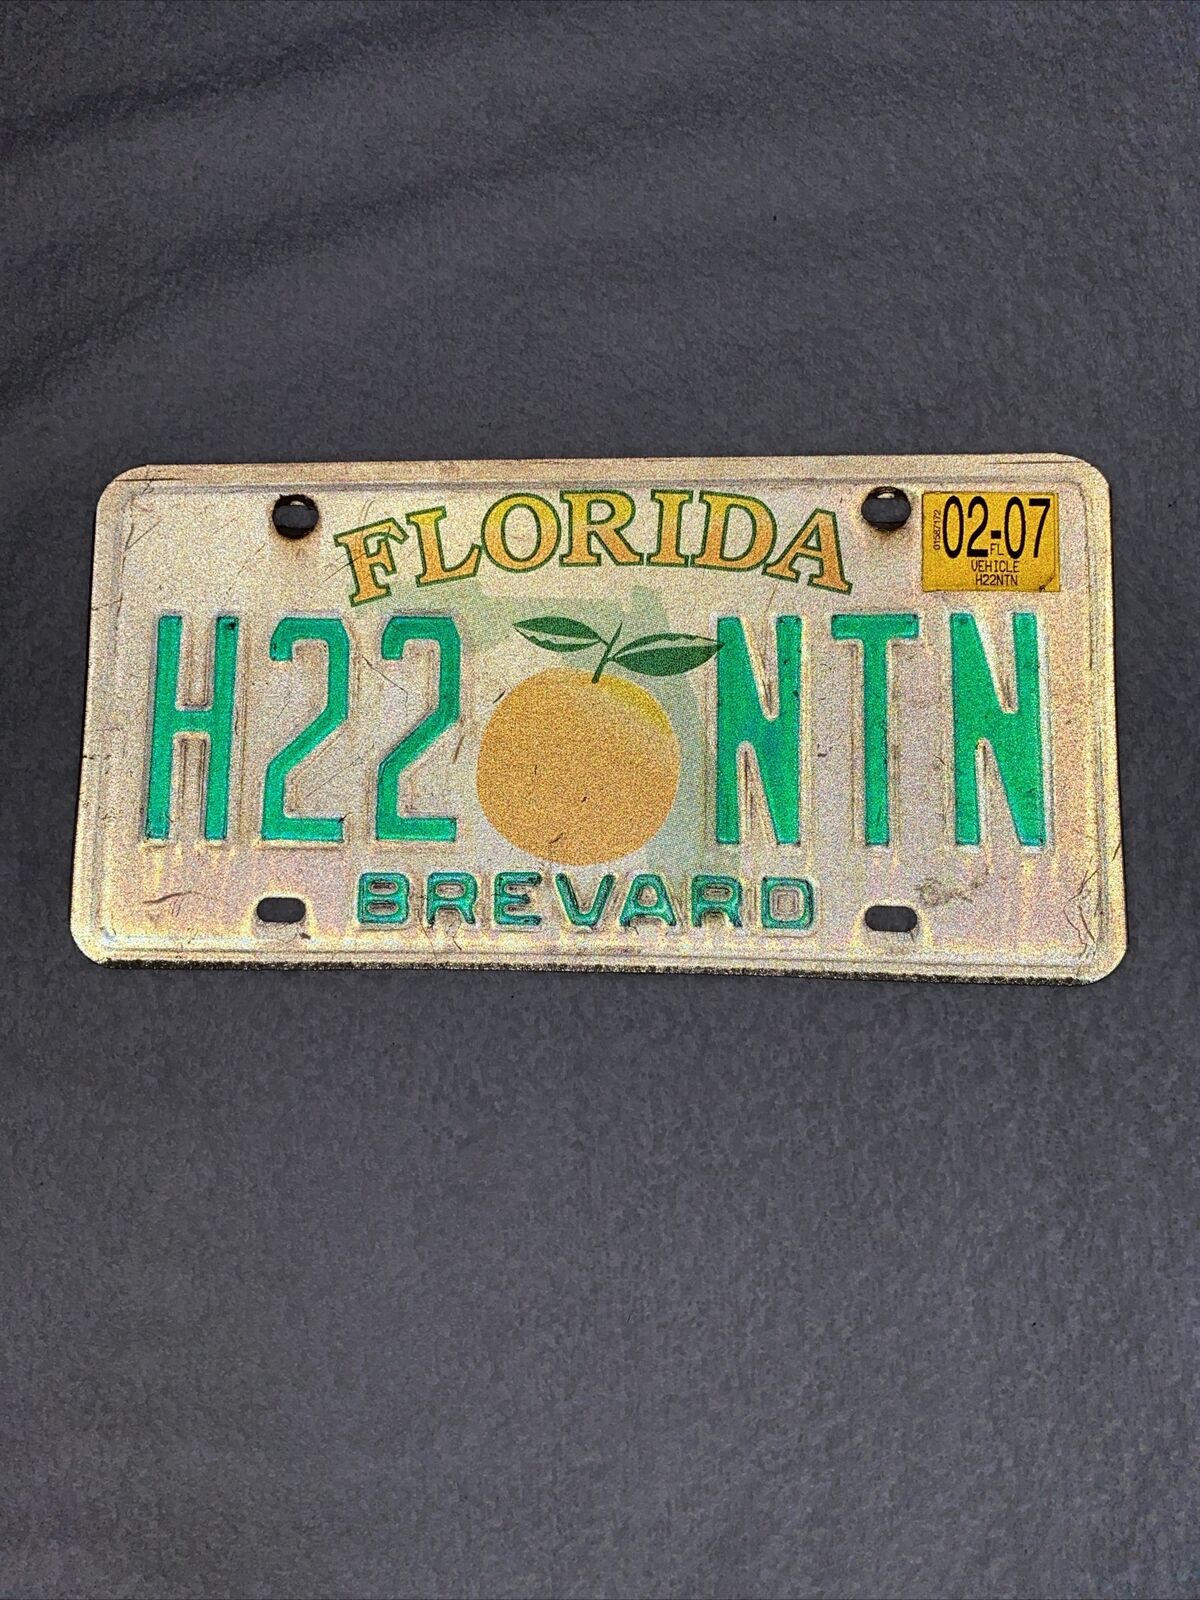 2007 Florida Brevard County Collectible License Plate State Fruit Orange Tag